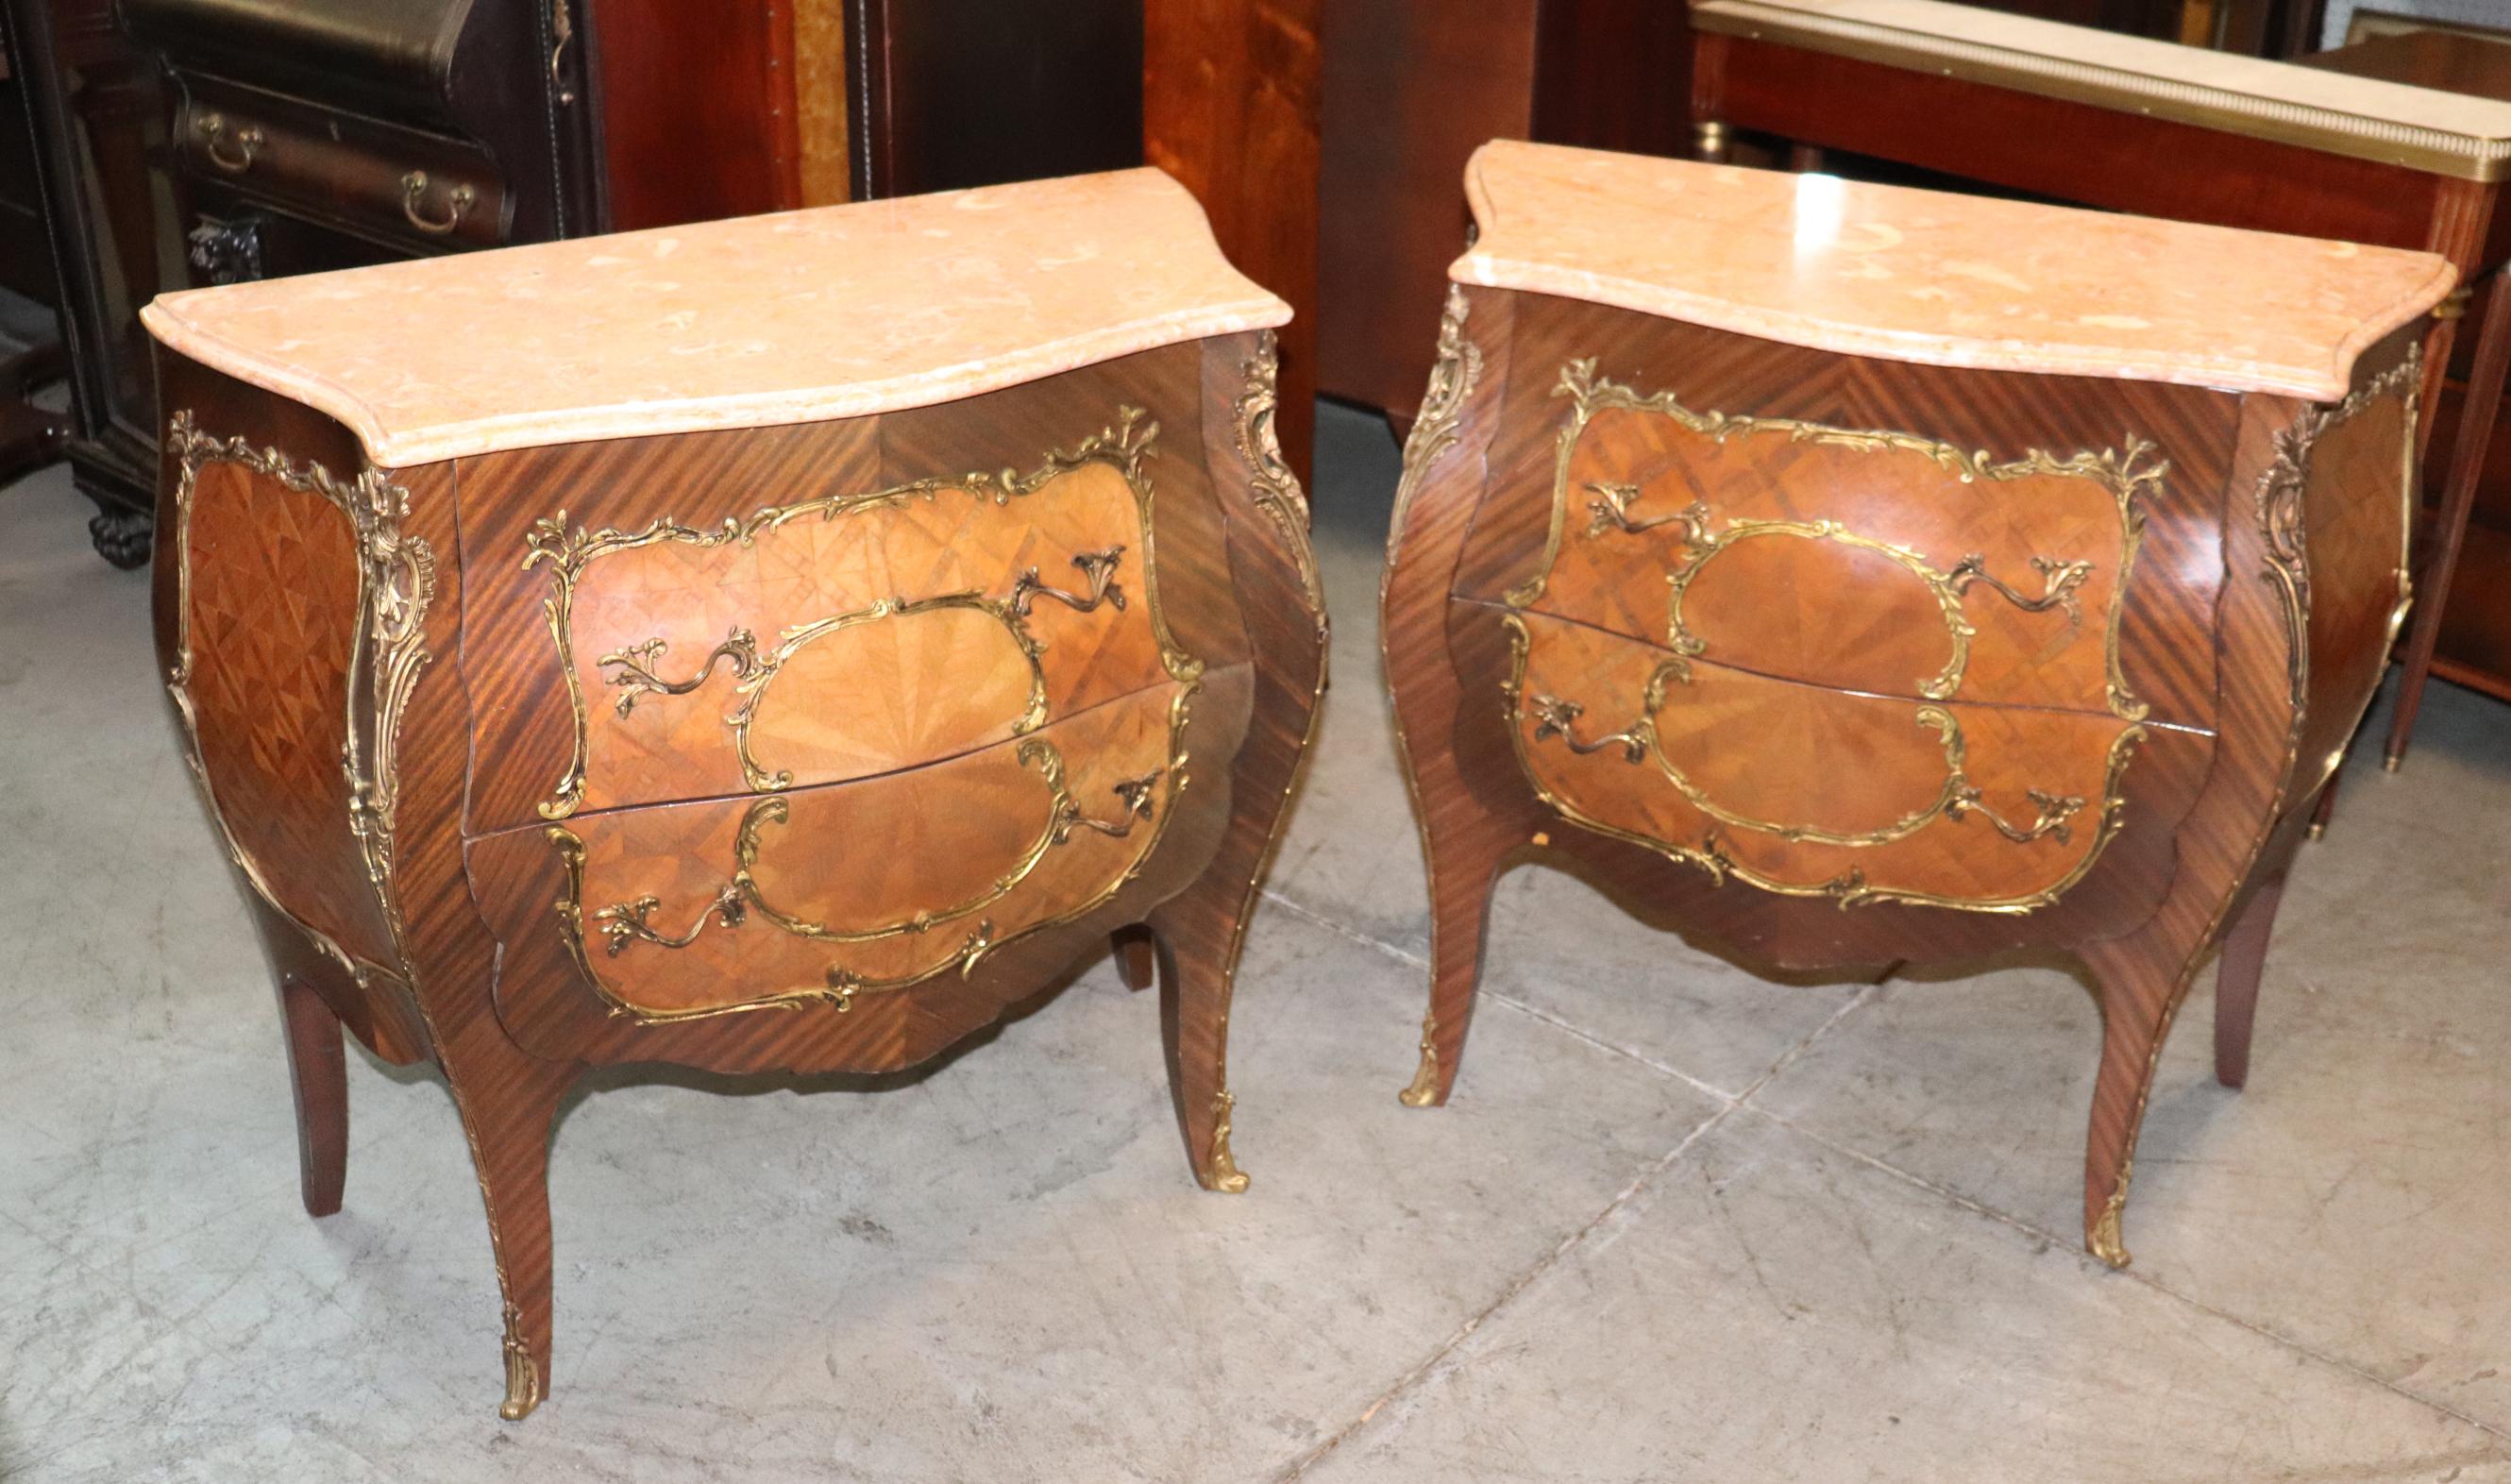 This is a beautiful pair of walnut and mahogany marquetry bombe nightstands with marble tops and fine bronze ormolu. The stands appear better in person but because they are marquetry the lighting makes the designs appear lighter or darker depending